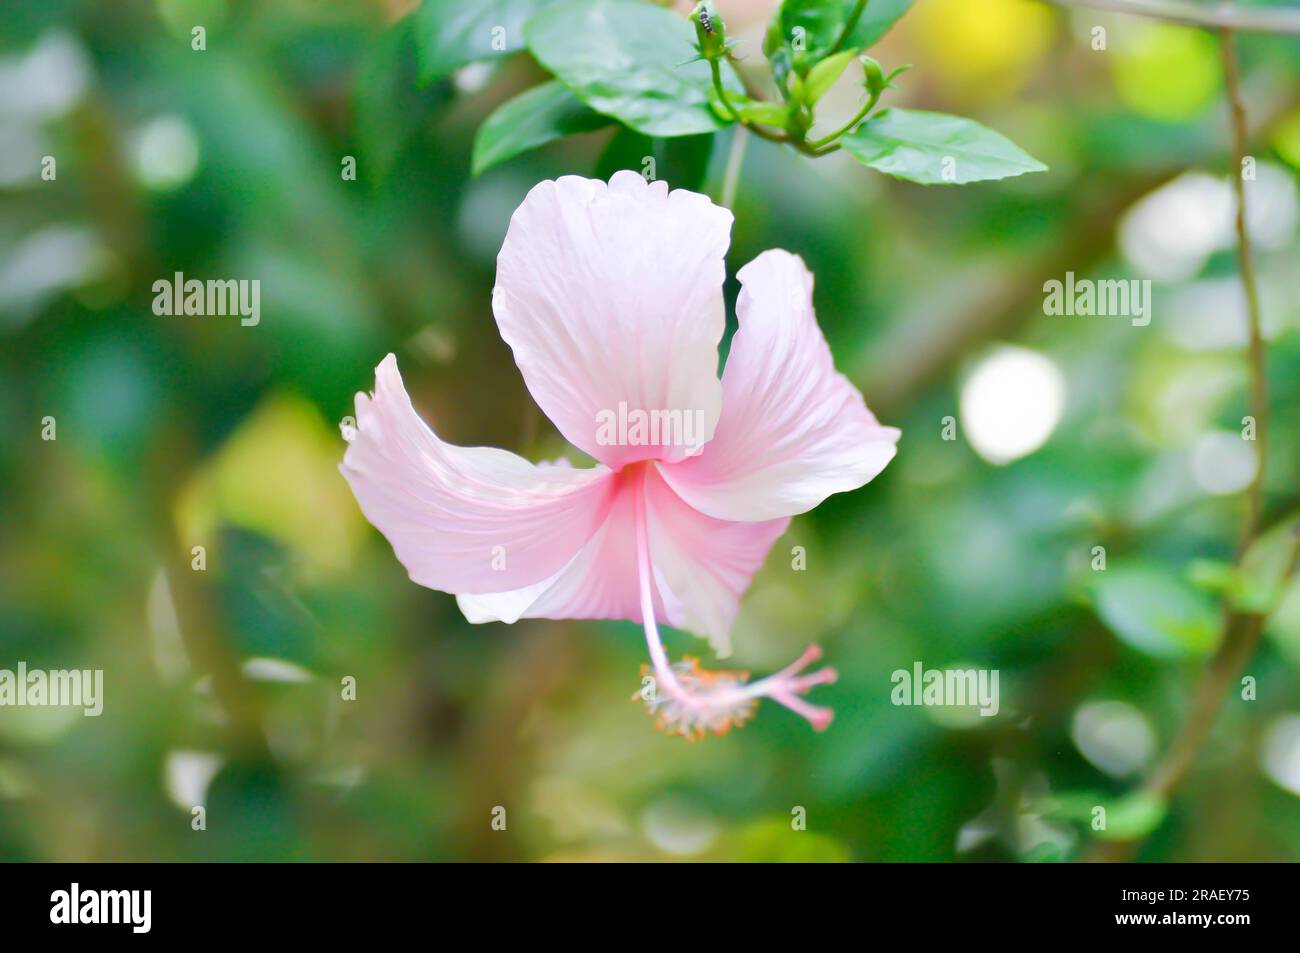 Chinese rose or Hibiscus or pink flower Stock Photo